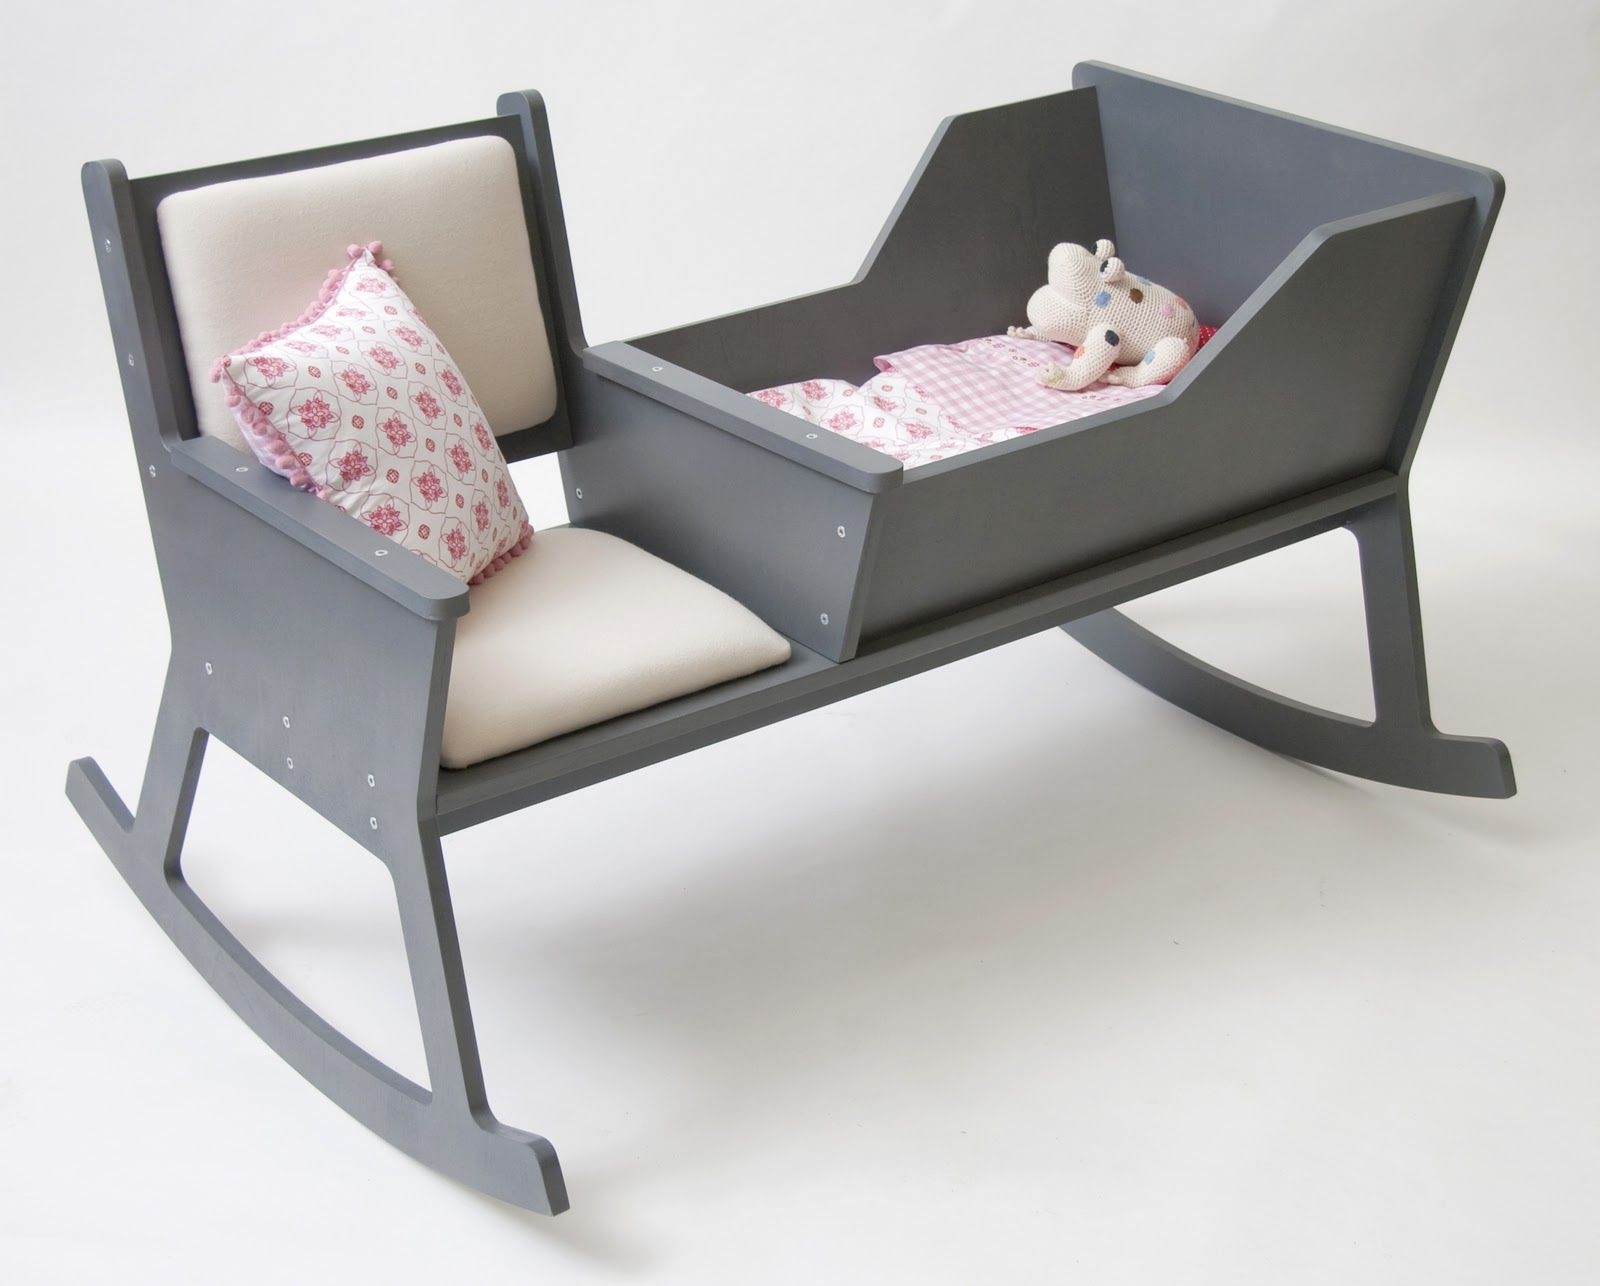 Rocking chair cradle contemporary kids bedding charlotte